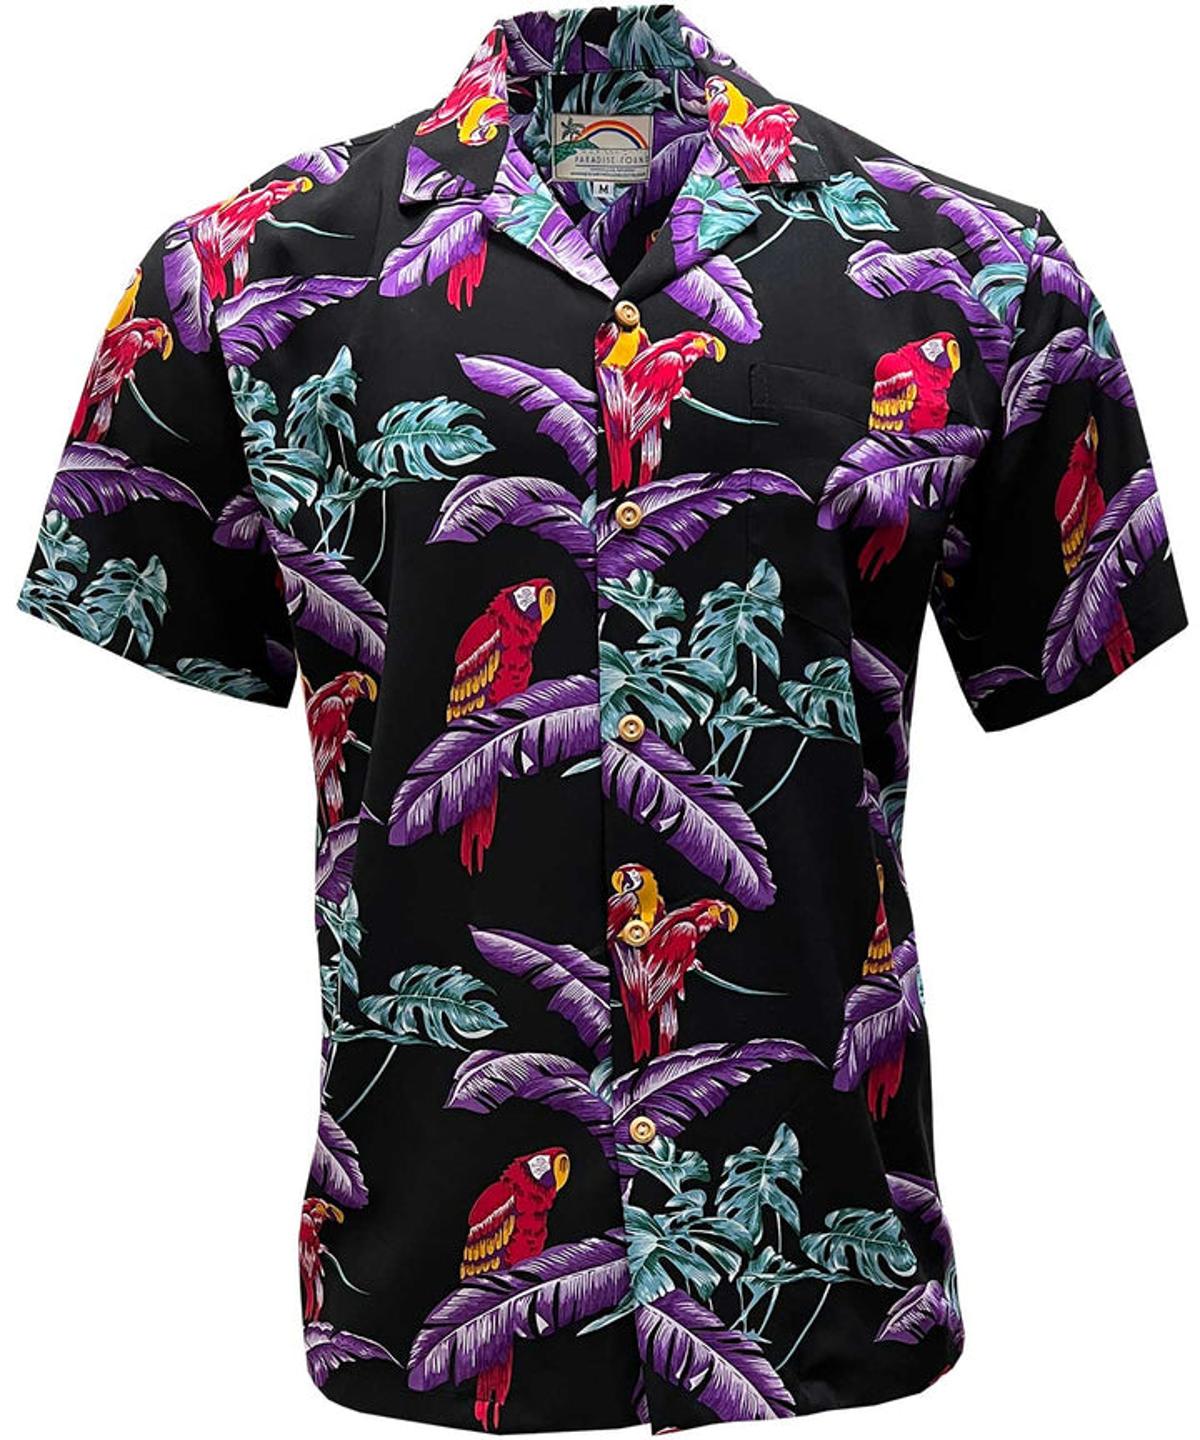 With Tropical Blue Flowers Tropical Parrot Shirt